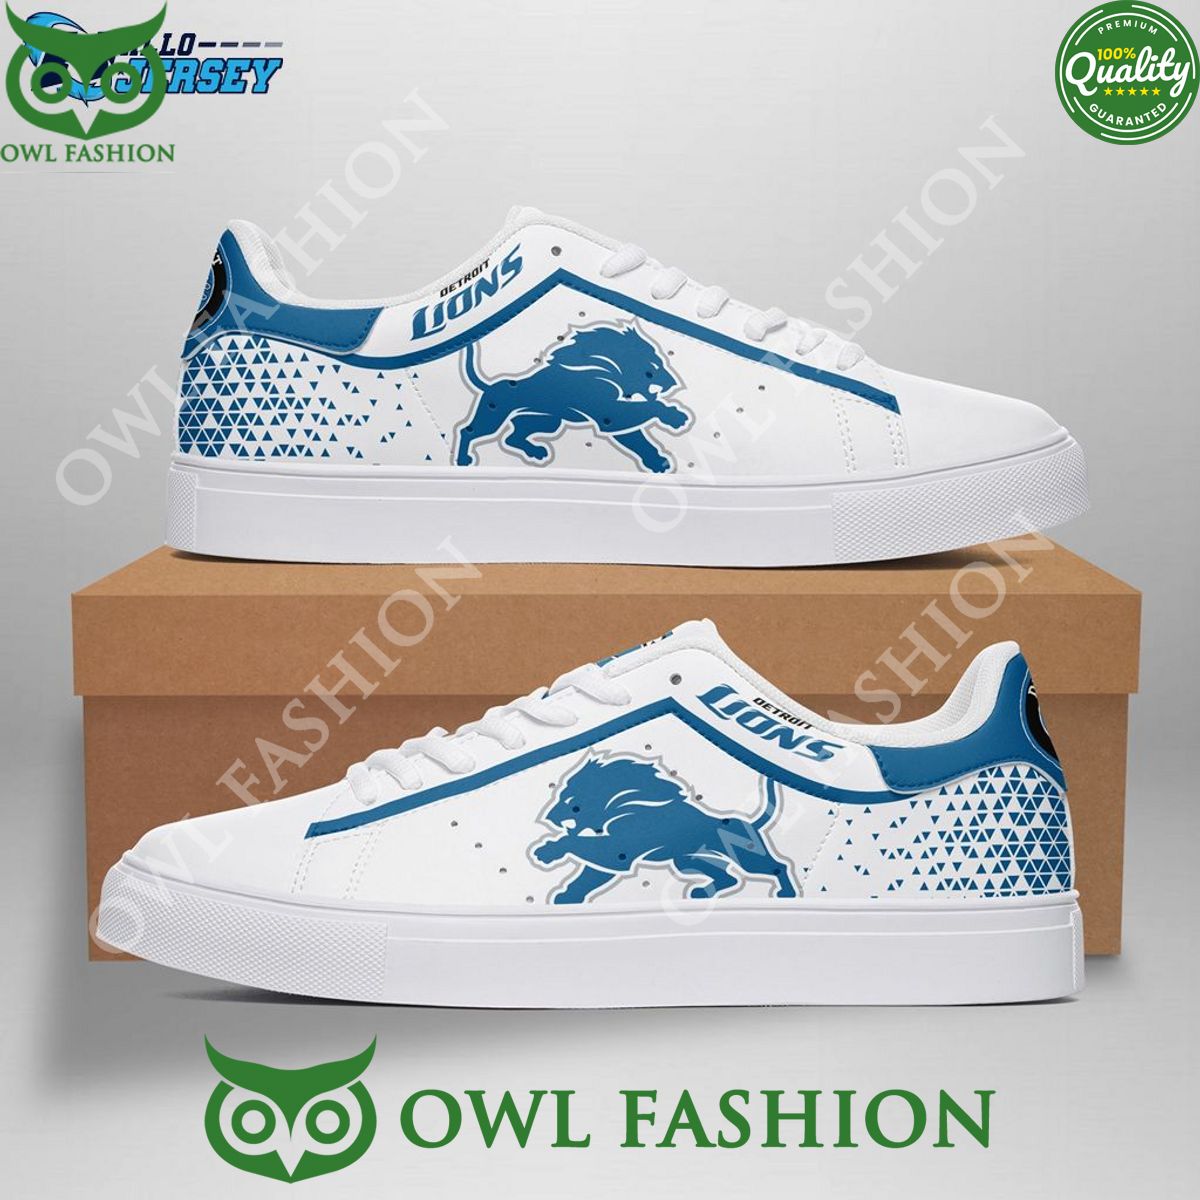 Detroit Lions Logo NFL Footwear Stan Smith Limited Such a charming picture.